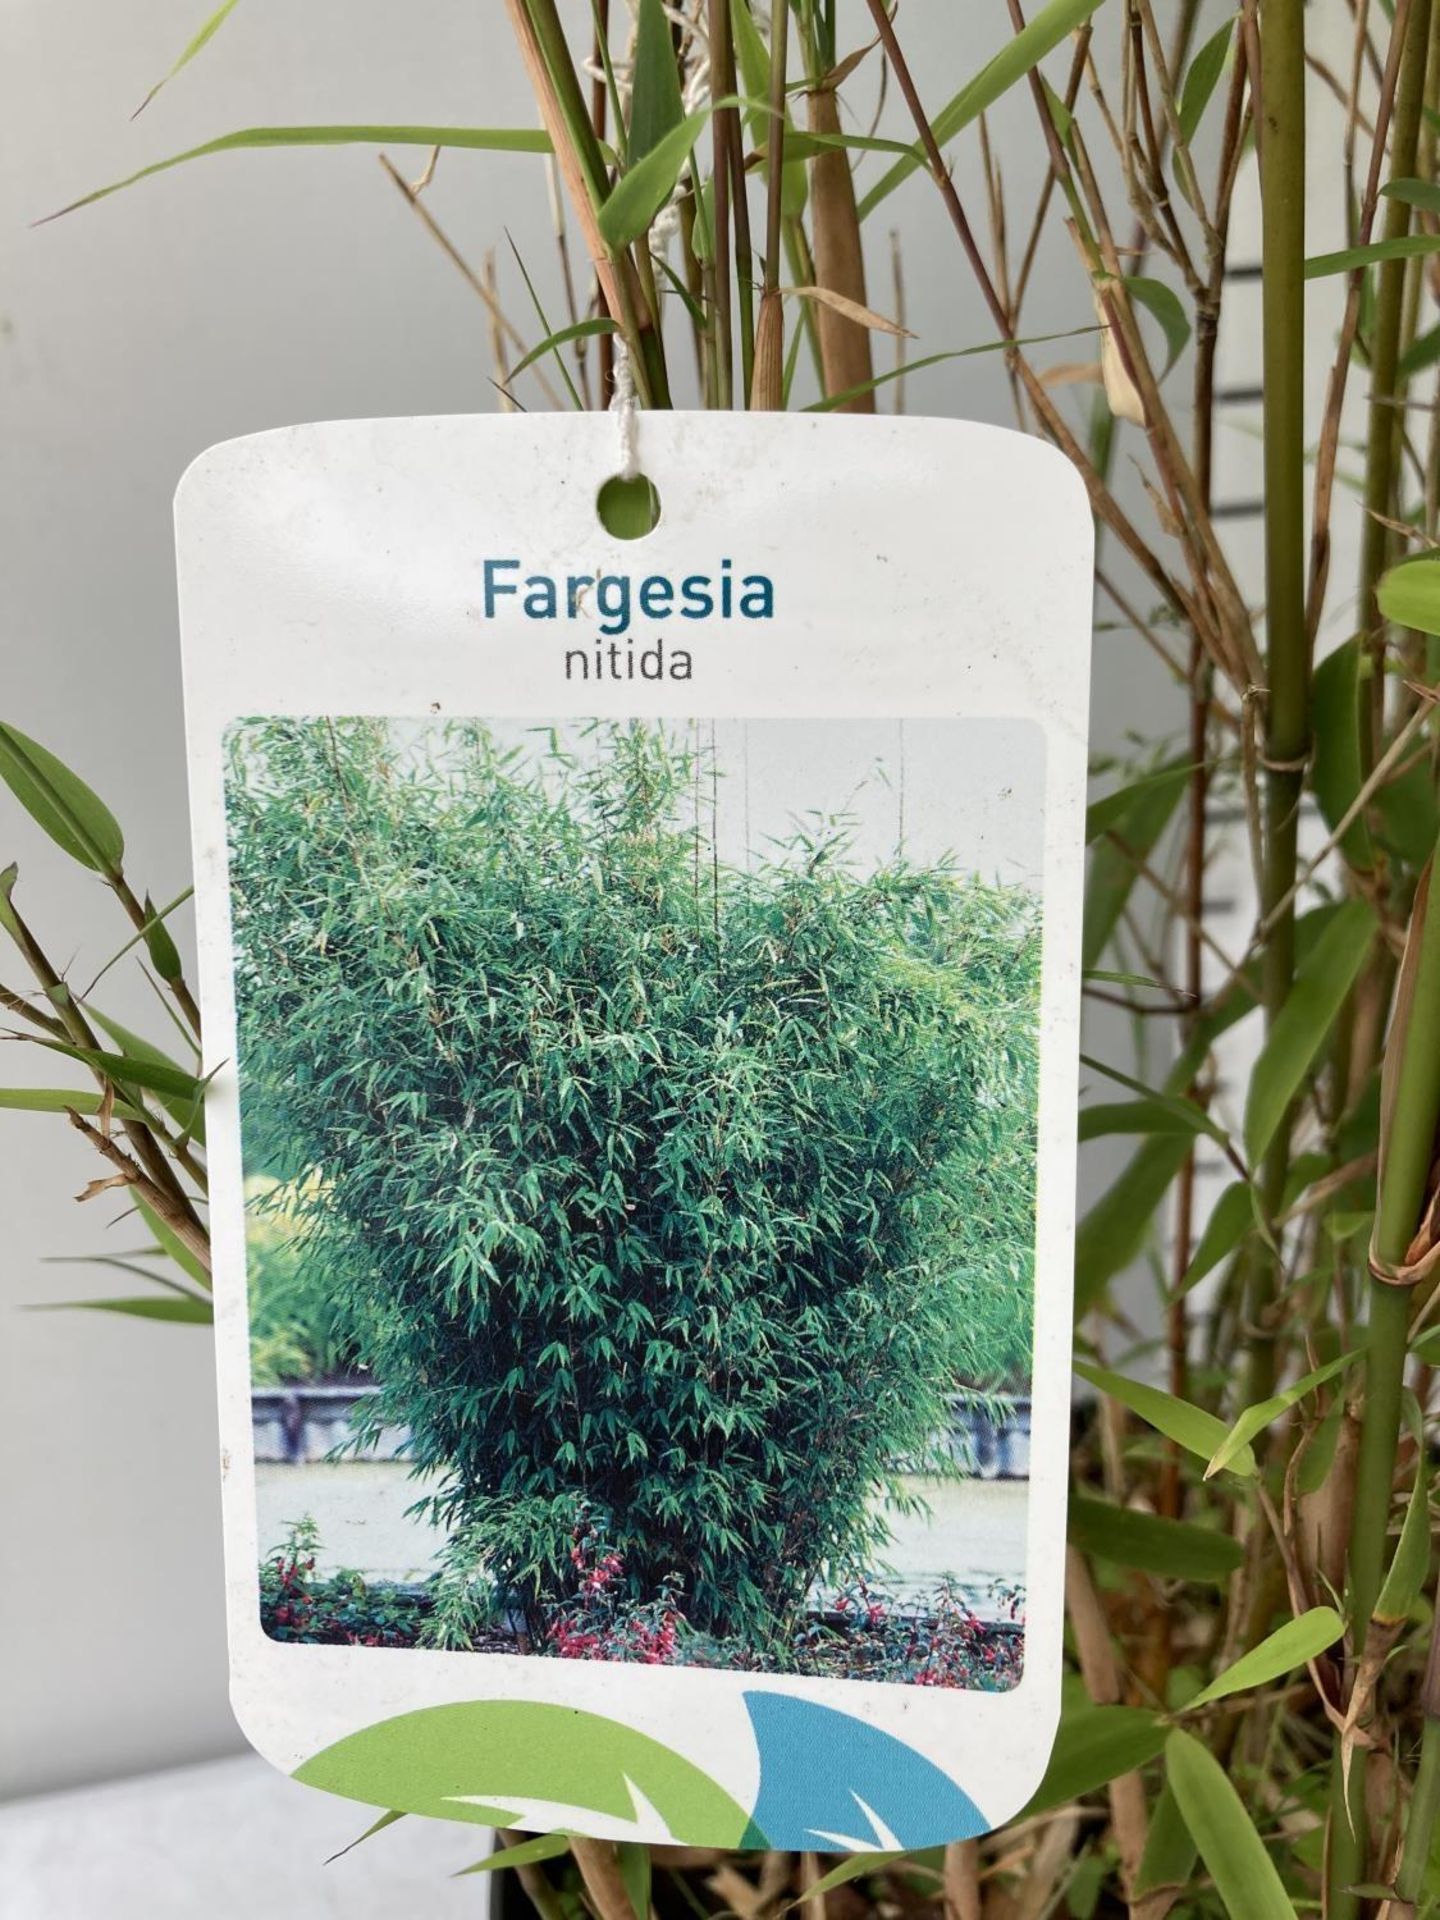 TWO BAMBOO FARGESIA 'NITIDA' APPROX 120CM IN HEIGHT IN 4 LTR POTS PLUS VAT TO BE SOLD FOR THE TWO - Image 6 of 6